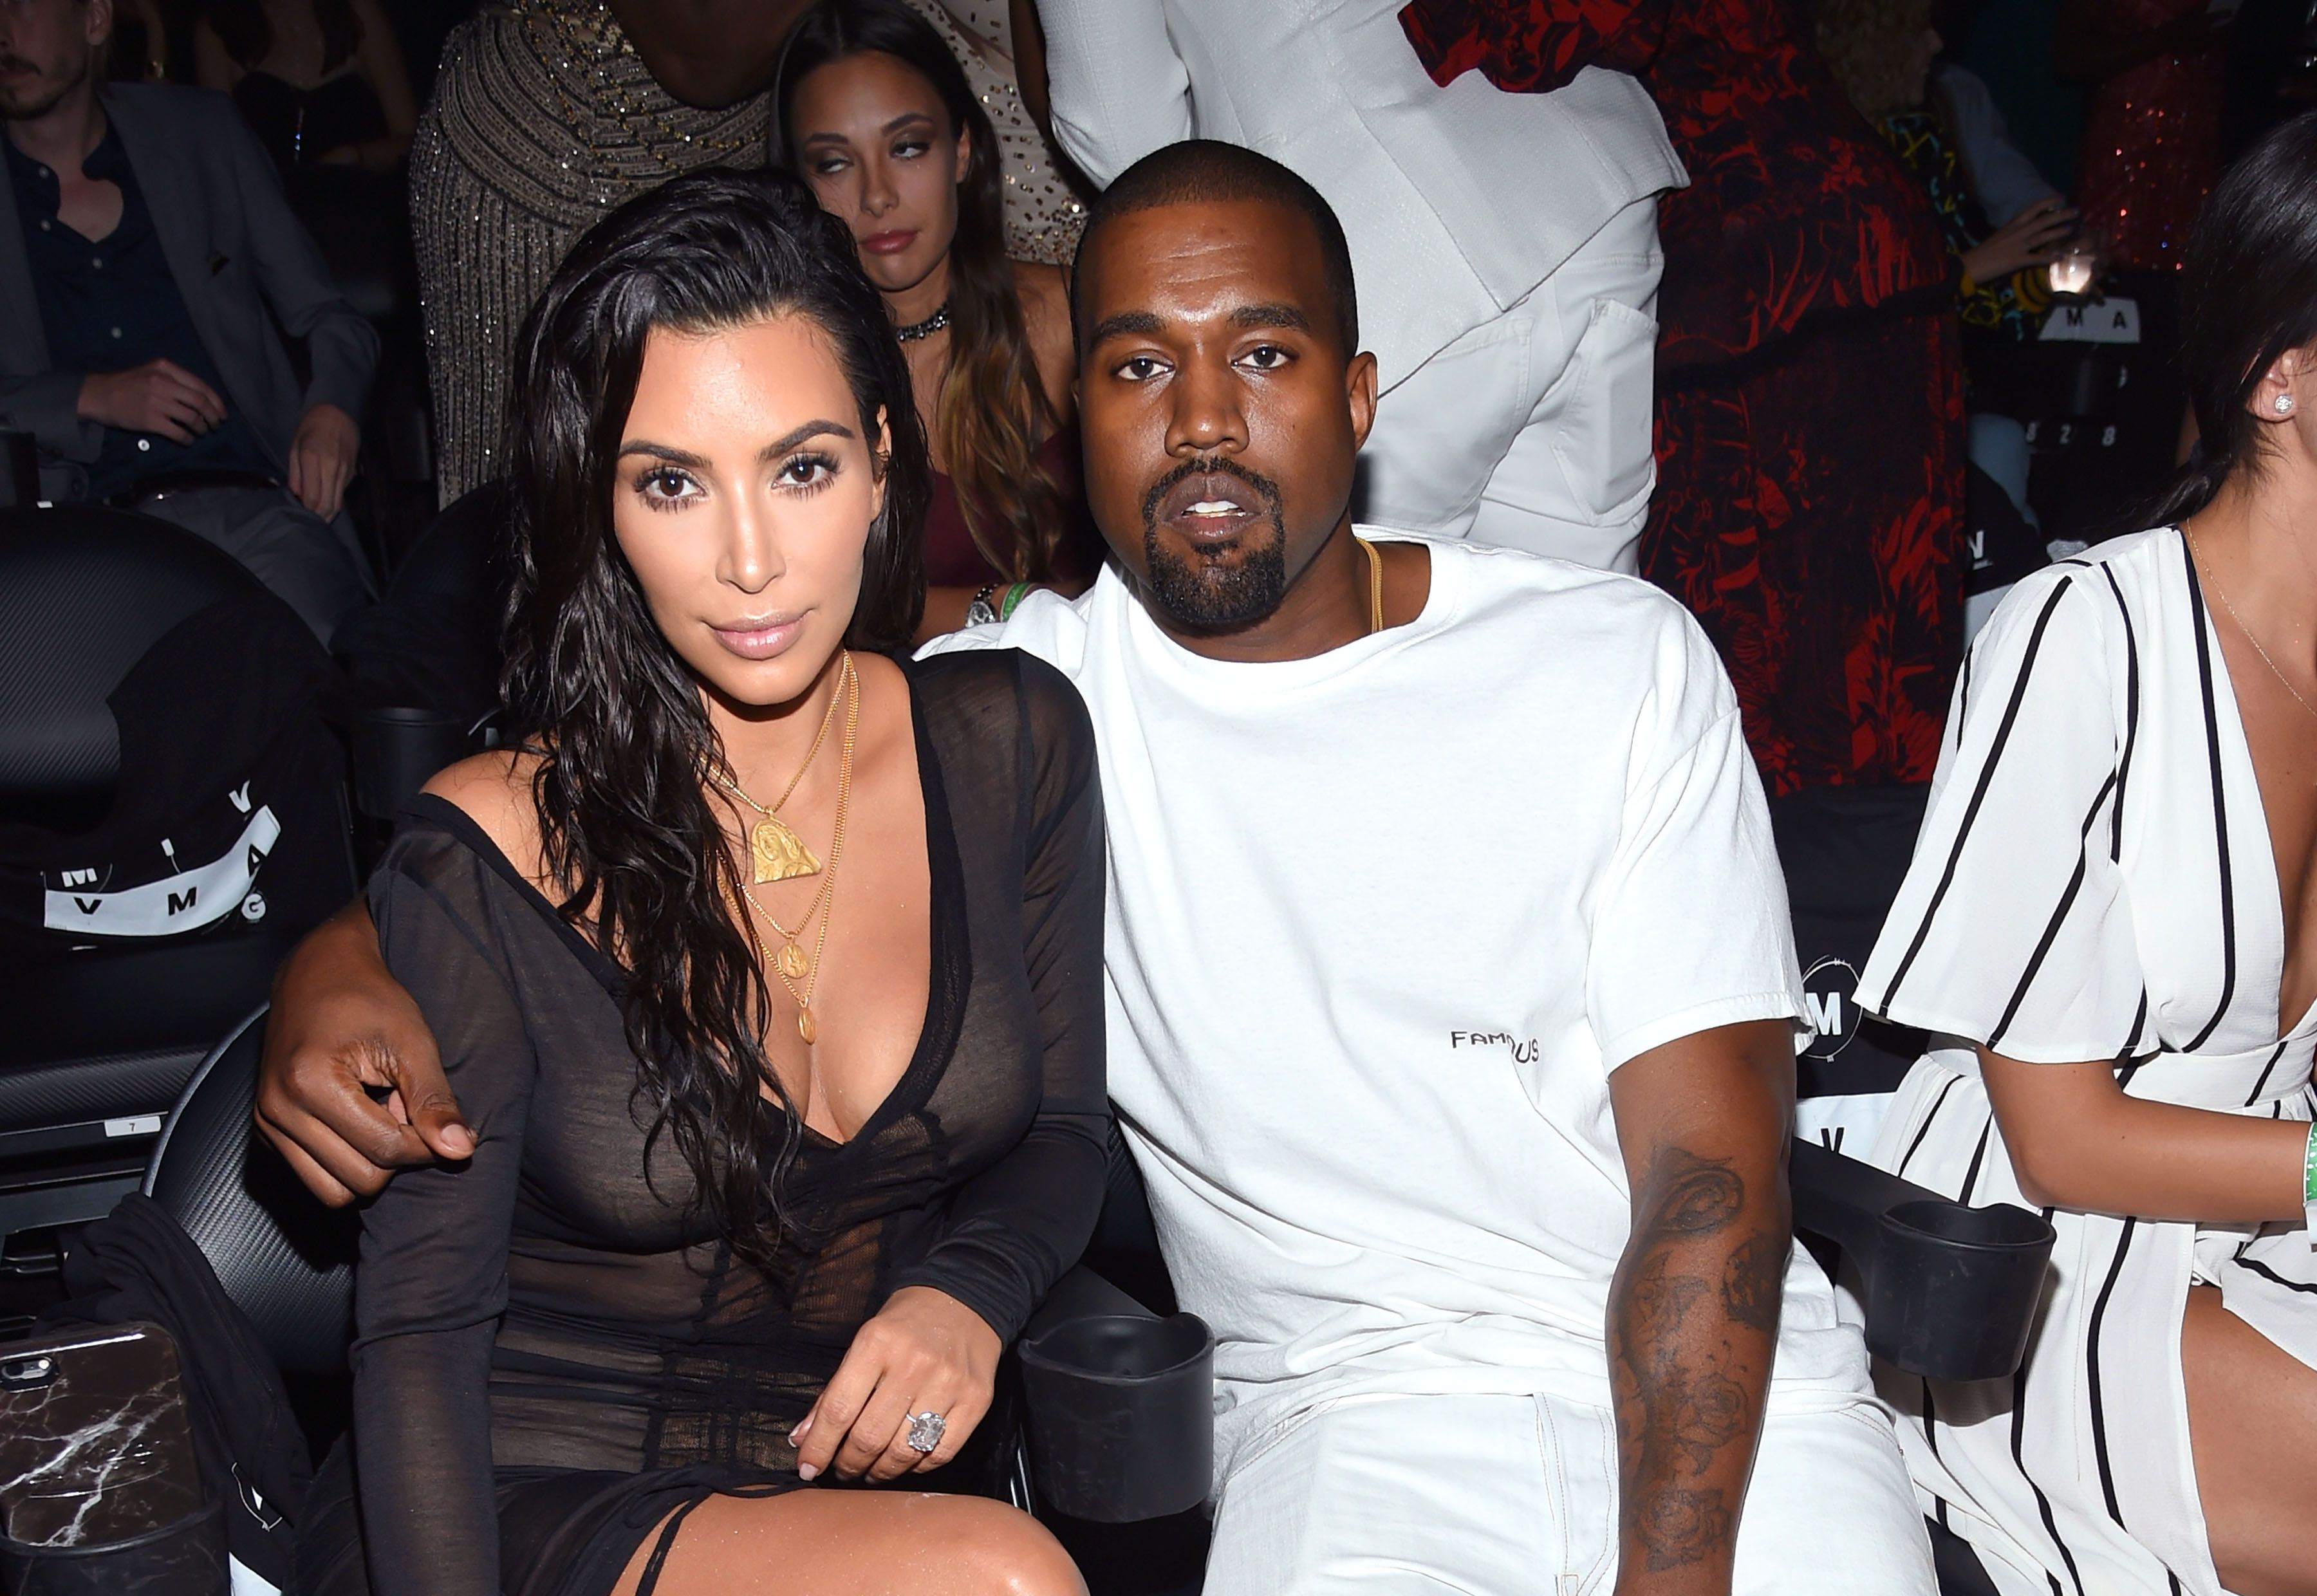 Why Kim Kardashian and Kanye West Are Divorcing - Relationship Issues